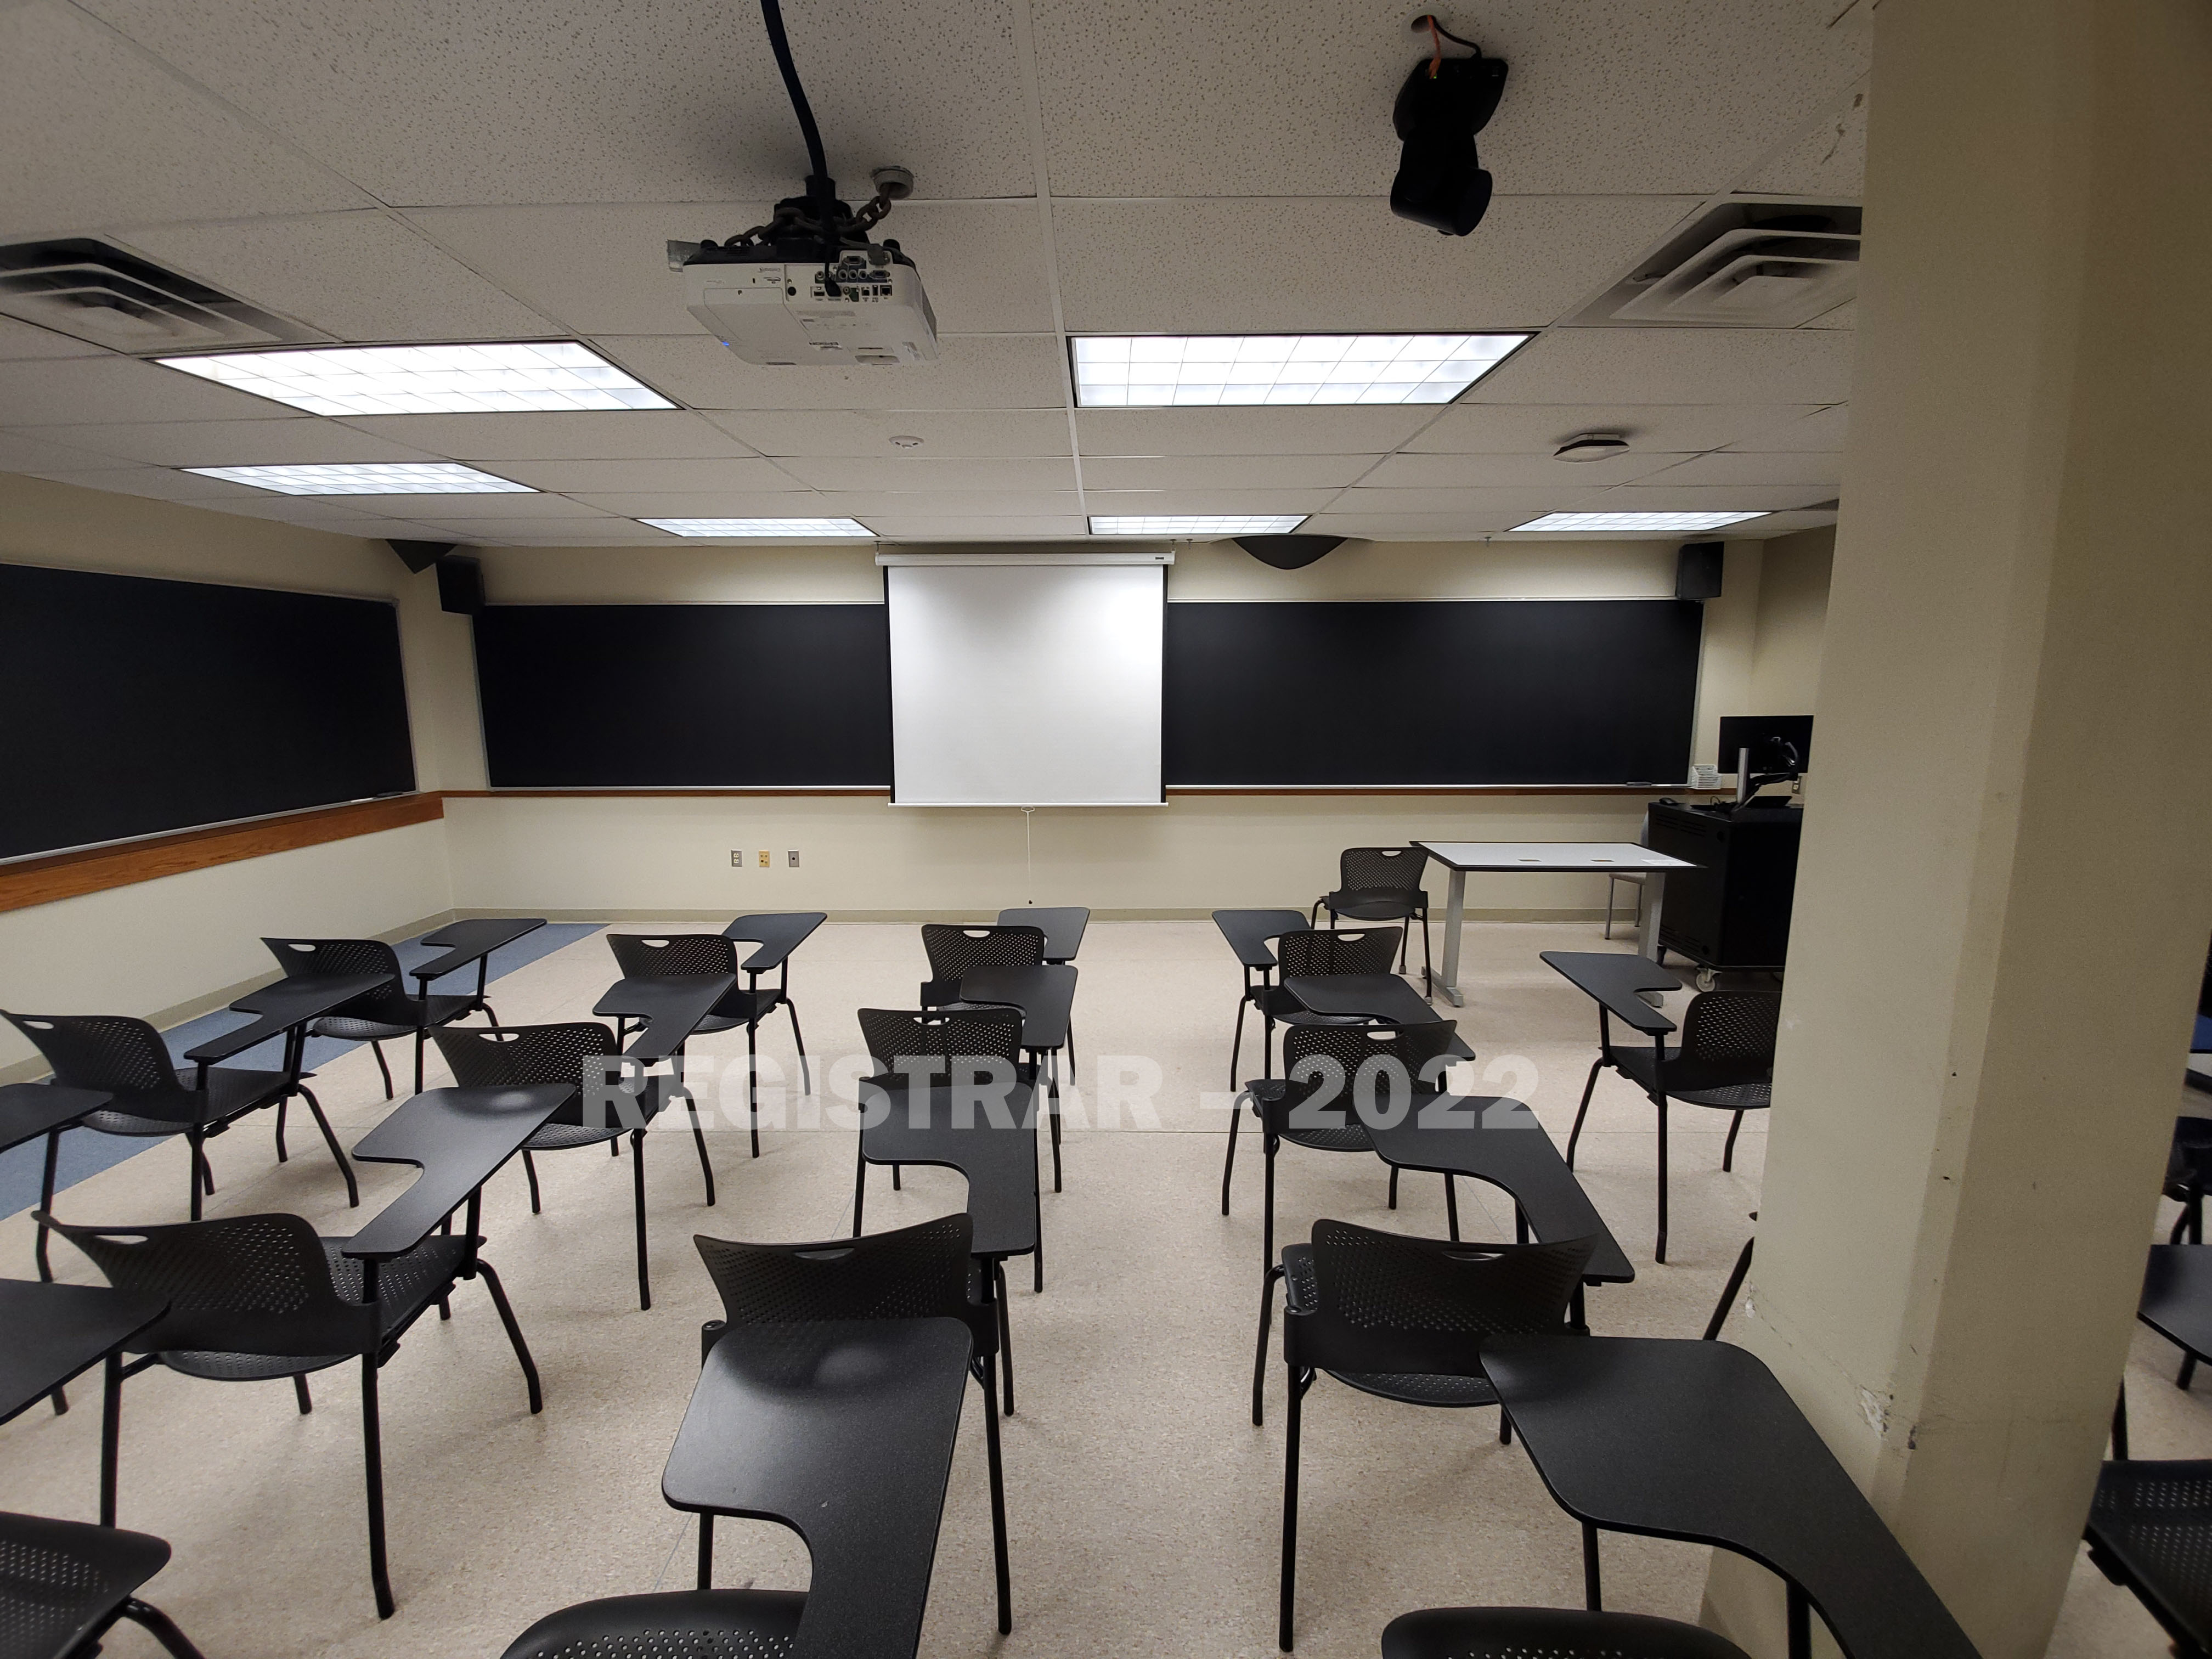 Enarson Classroom Building room 322 ultra wide angle view from the back of the room with projector screen down